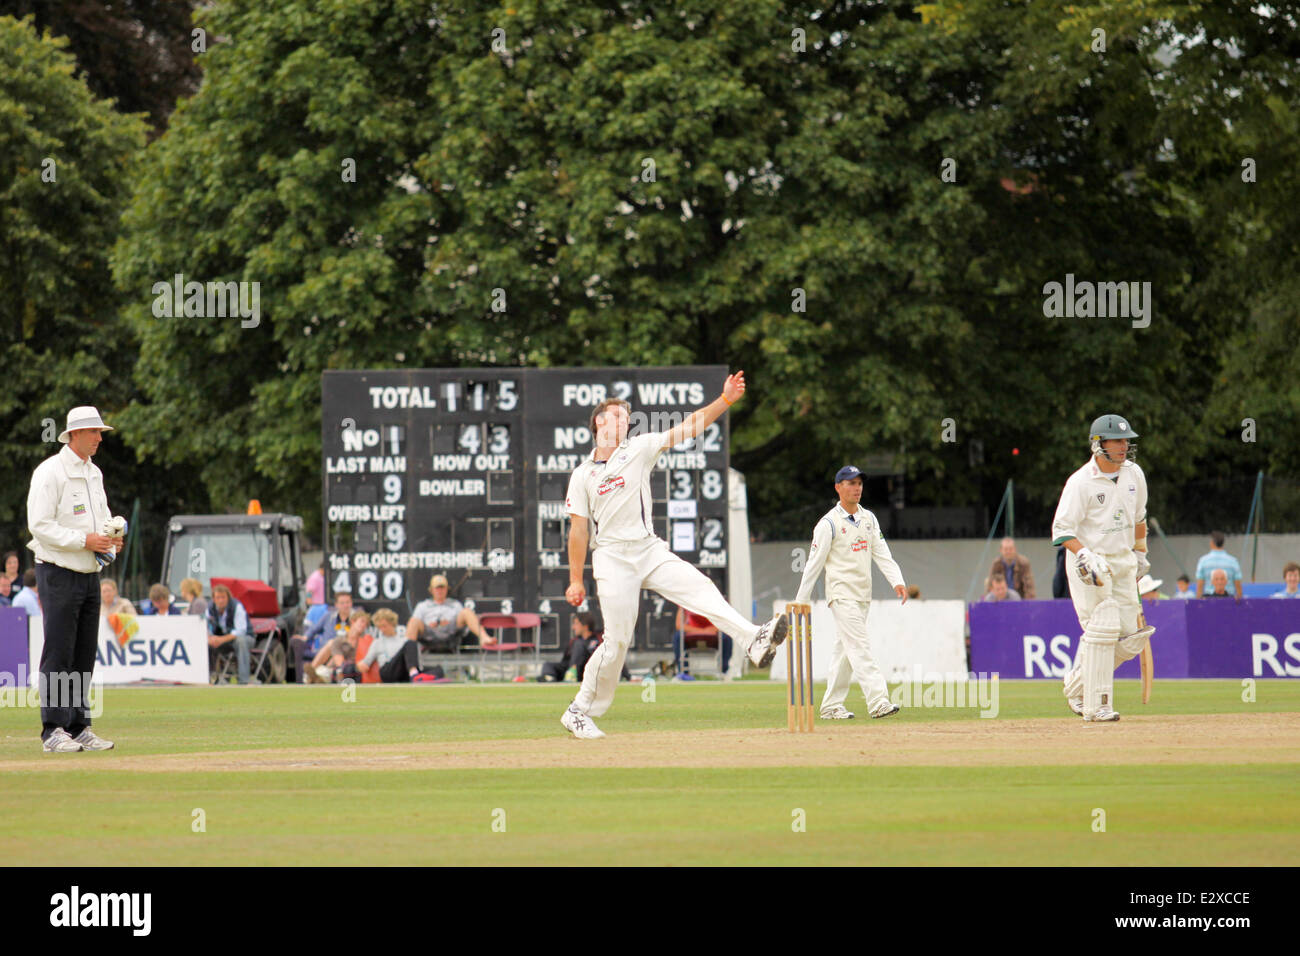 Men playing cricket at a match during the Cheltenham Cricket festival Stock Photo